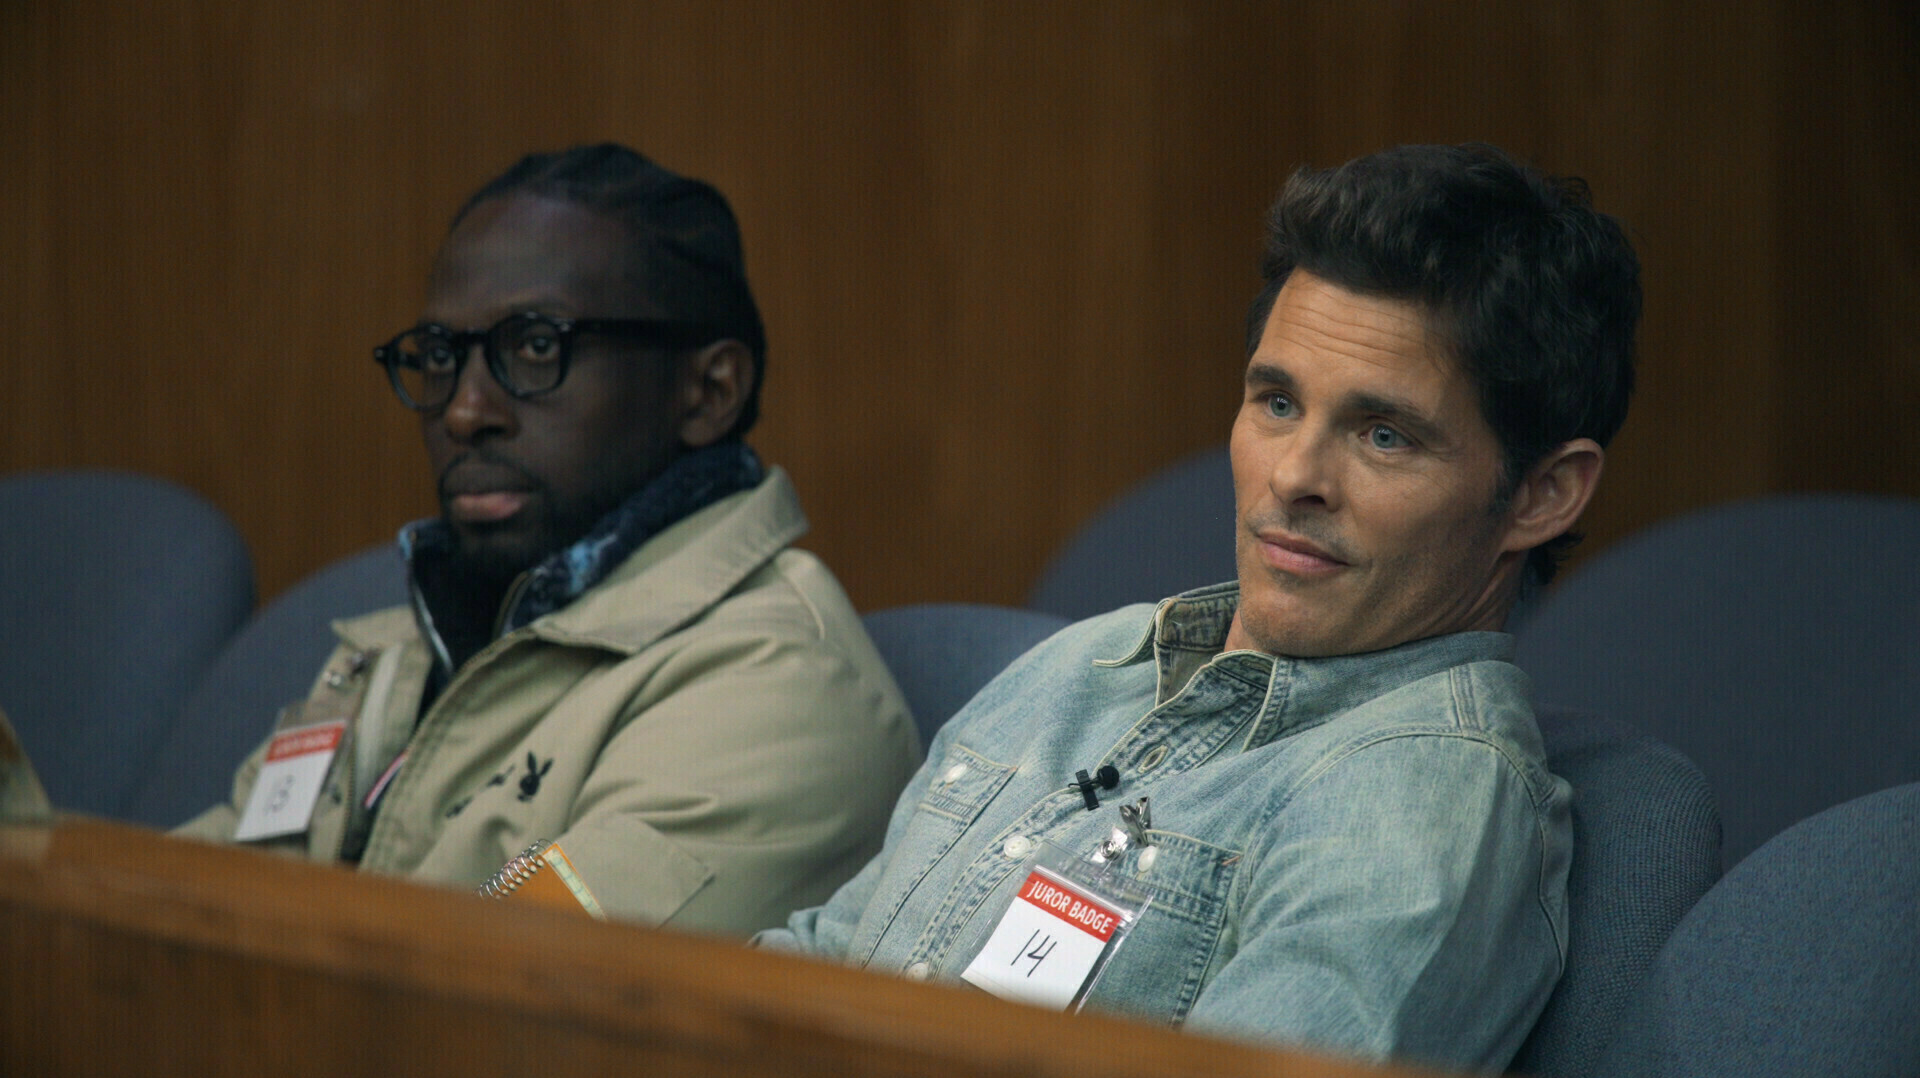 A Black man and a white man sit side-by-side in a jury box.